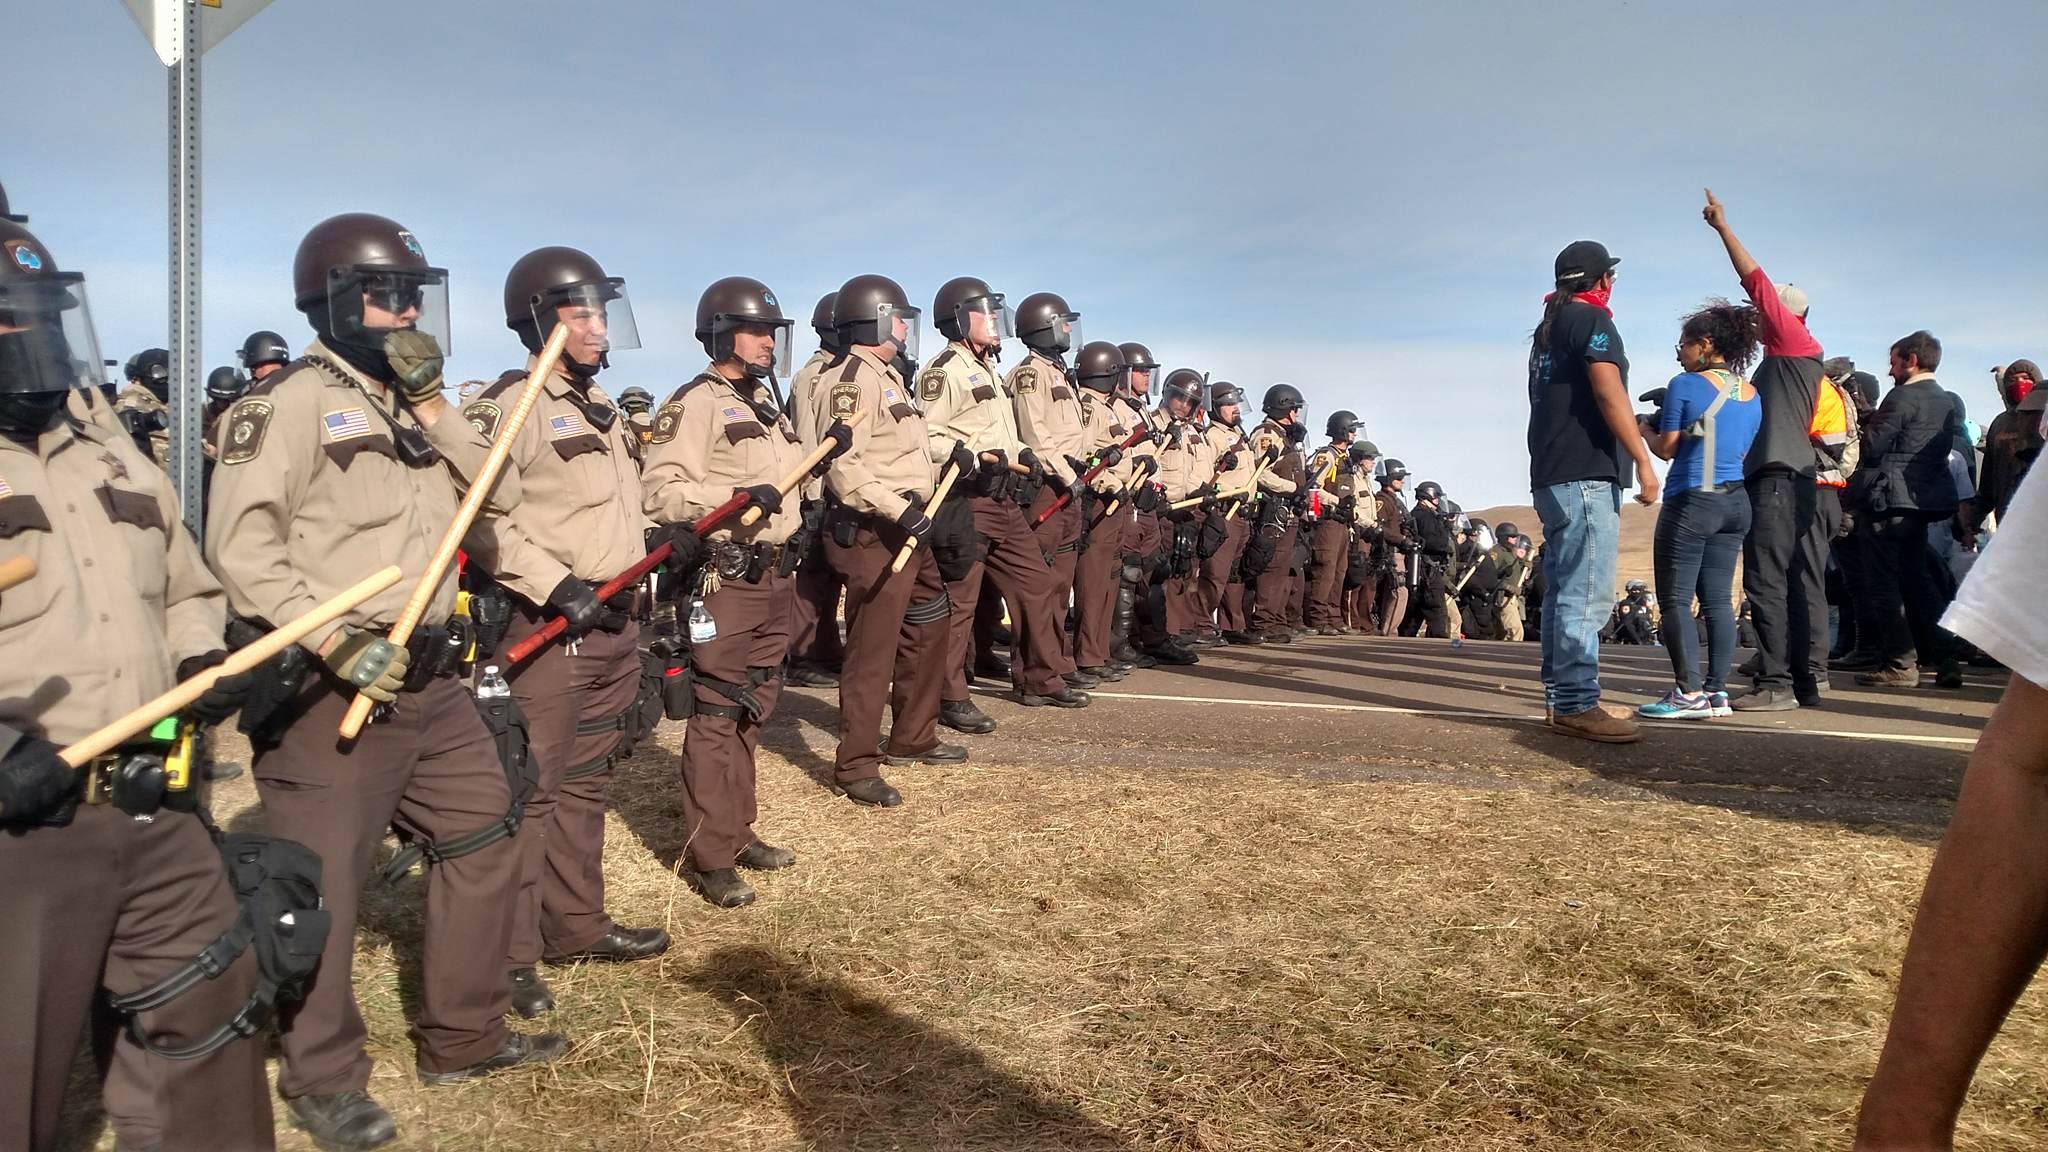 Water protectors face off with a police line off North Dakota Highway 1806. Law enforcement wear riot gear as they prepare to remove the frontline camp. Oct. 27, 2016 (Derrick Broze for MintPress)